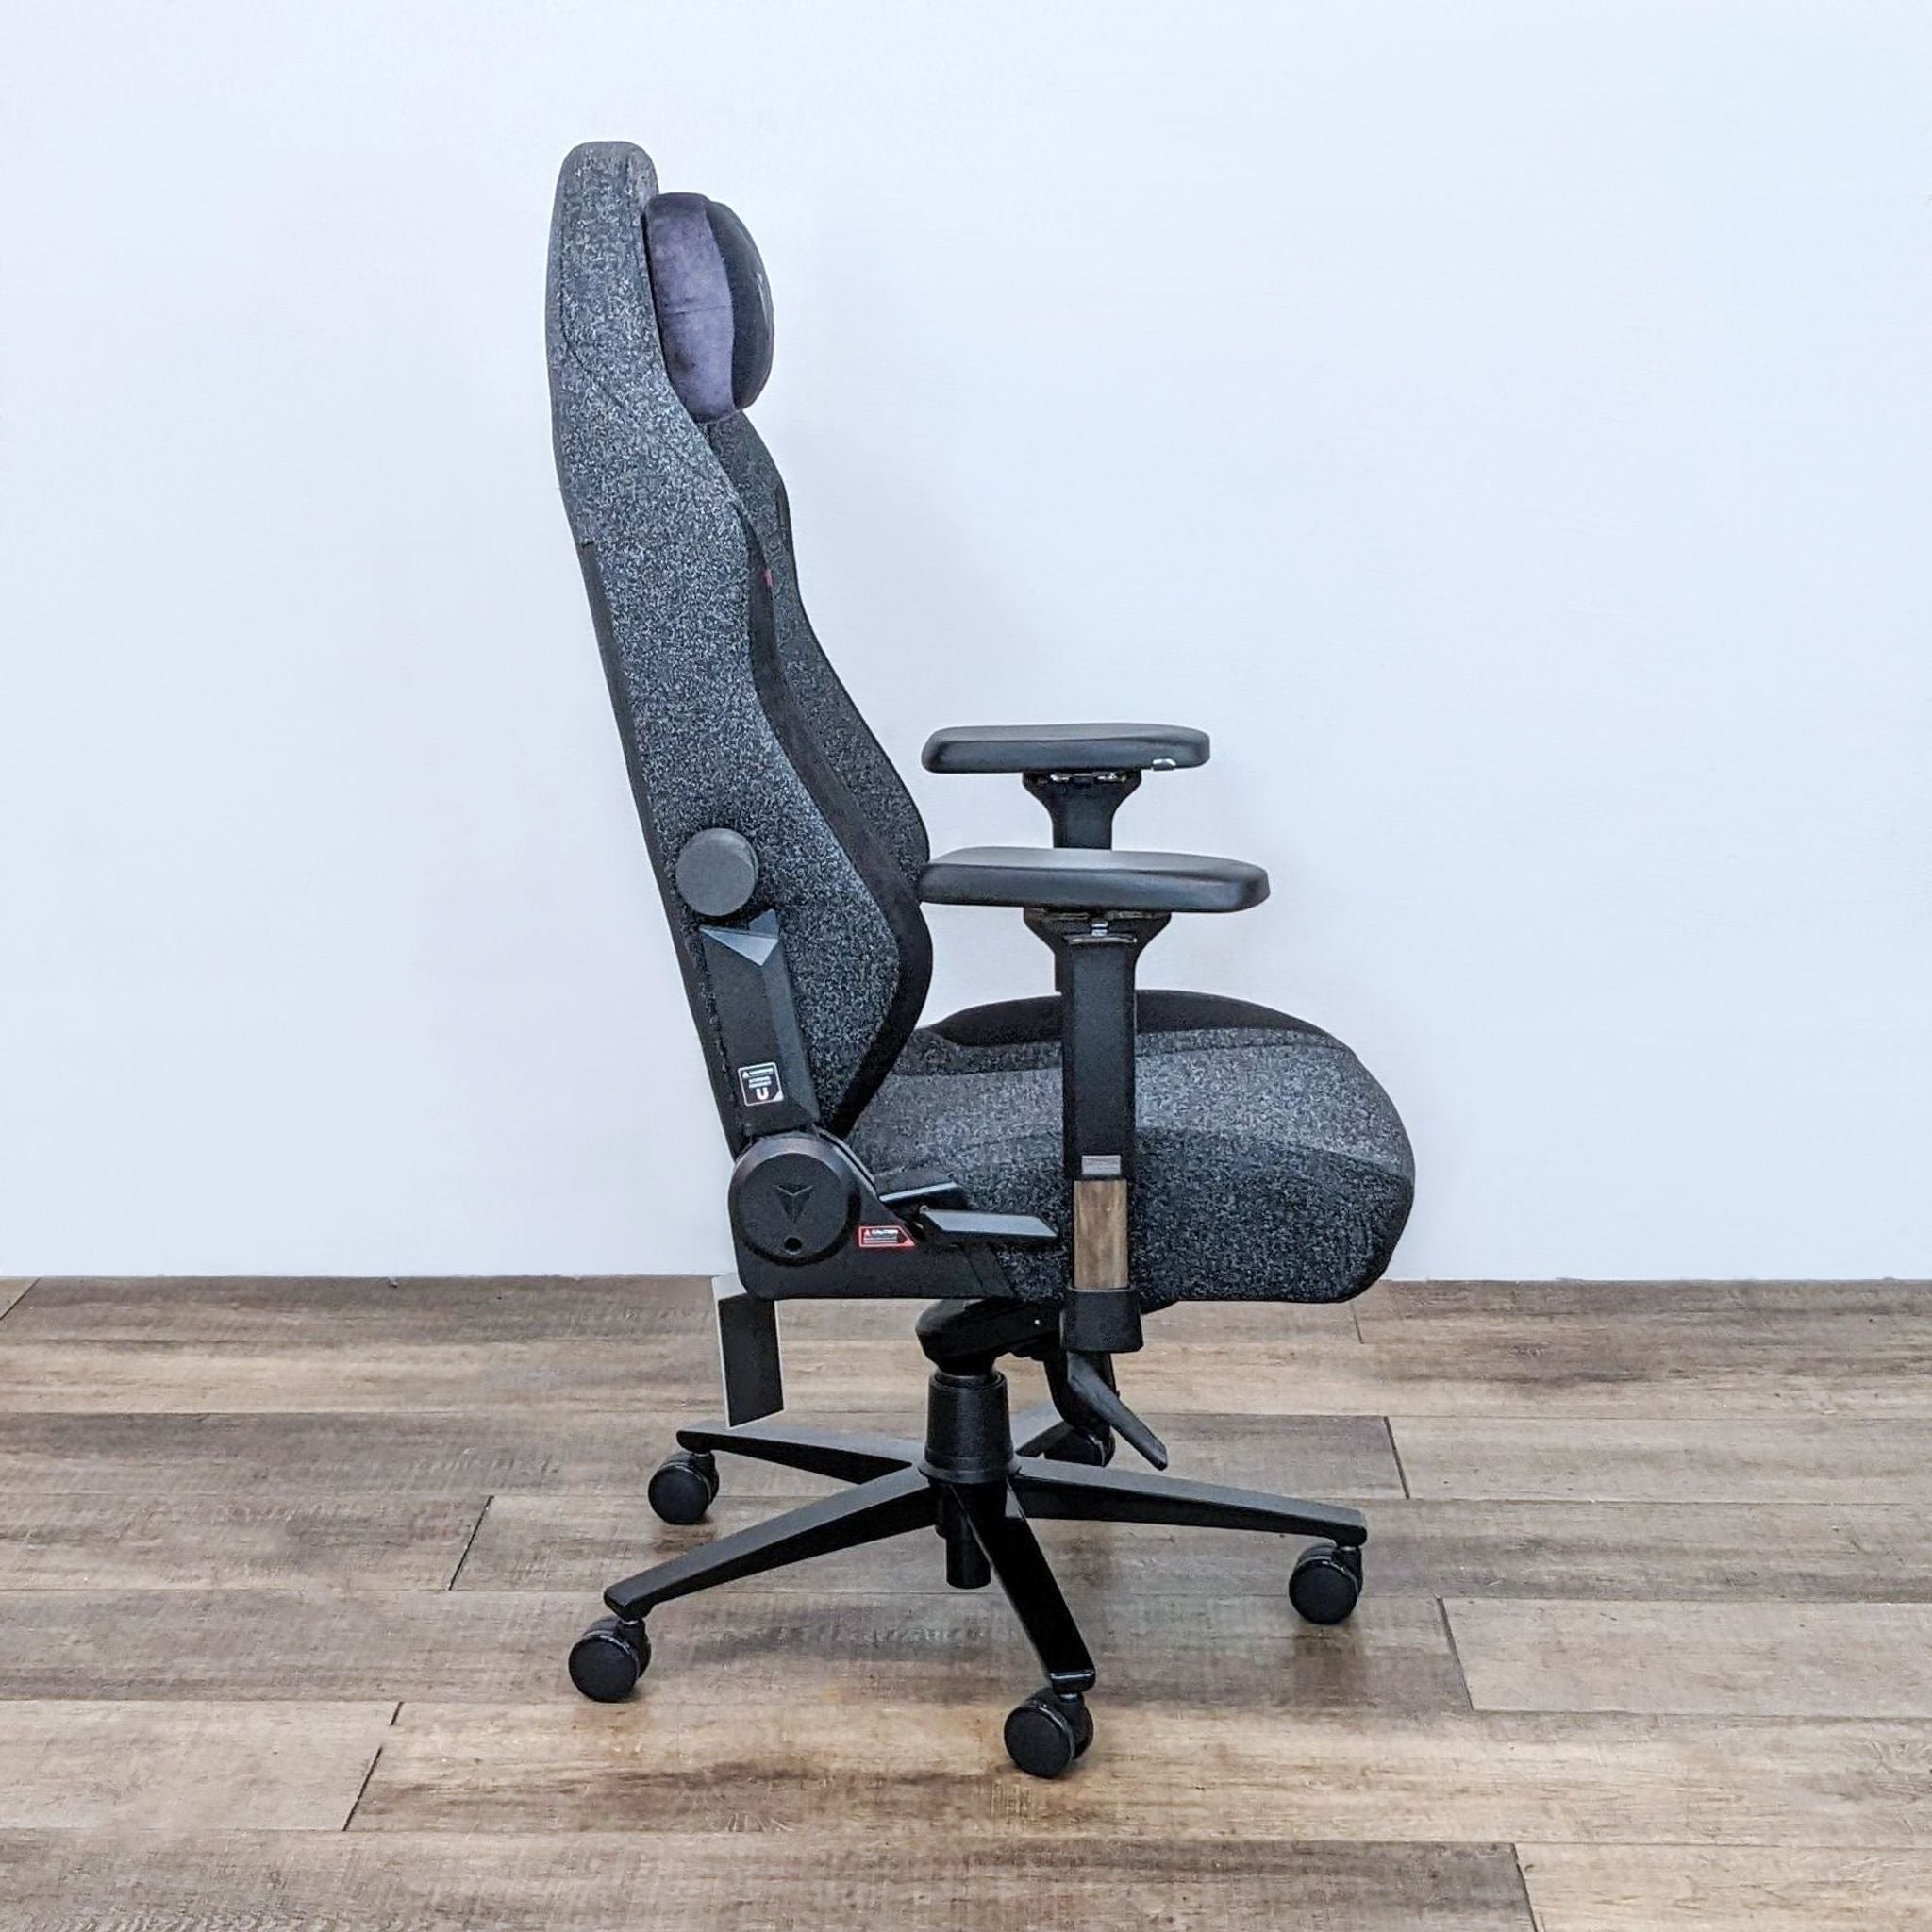 Alt text 2: Side view of a gray Secretlab Titan Evo chair, showcasing its hydraulics and adjustable armrests.